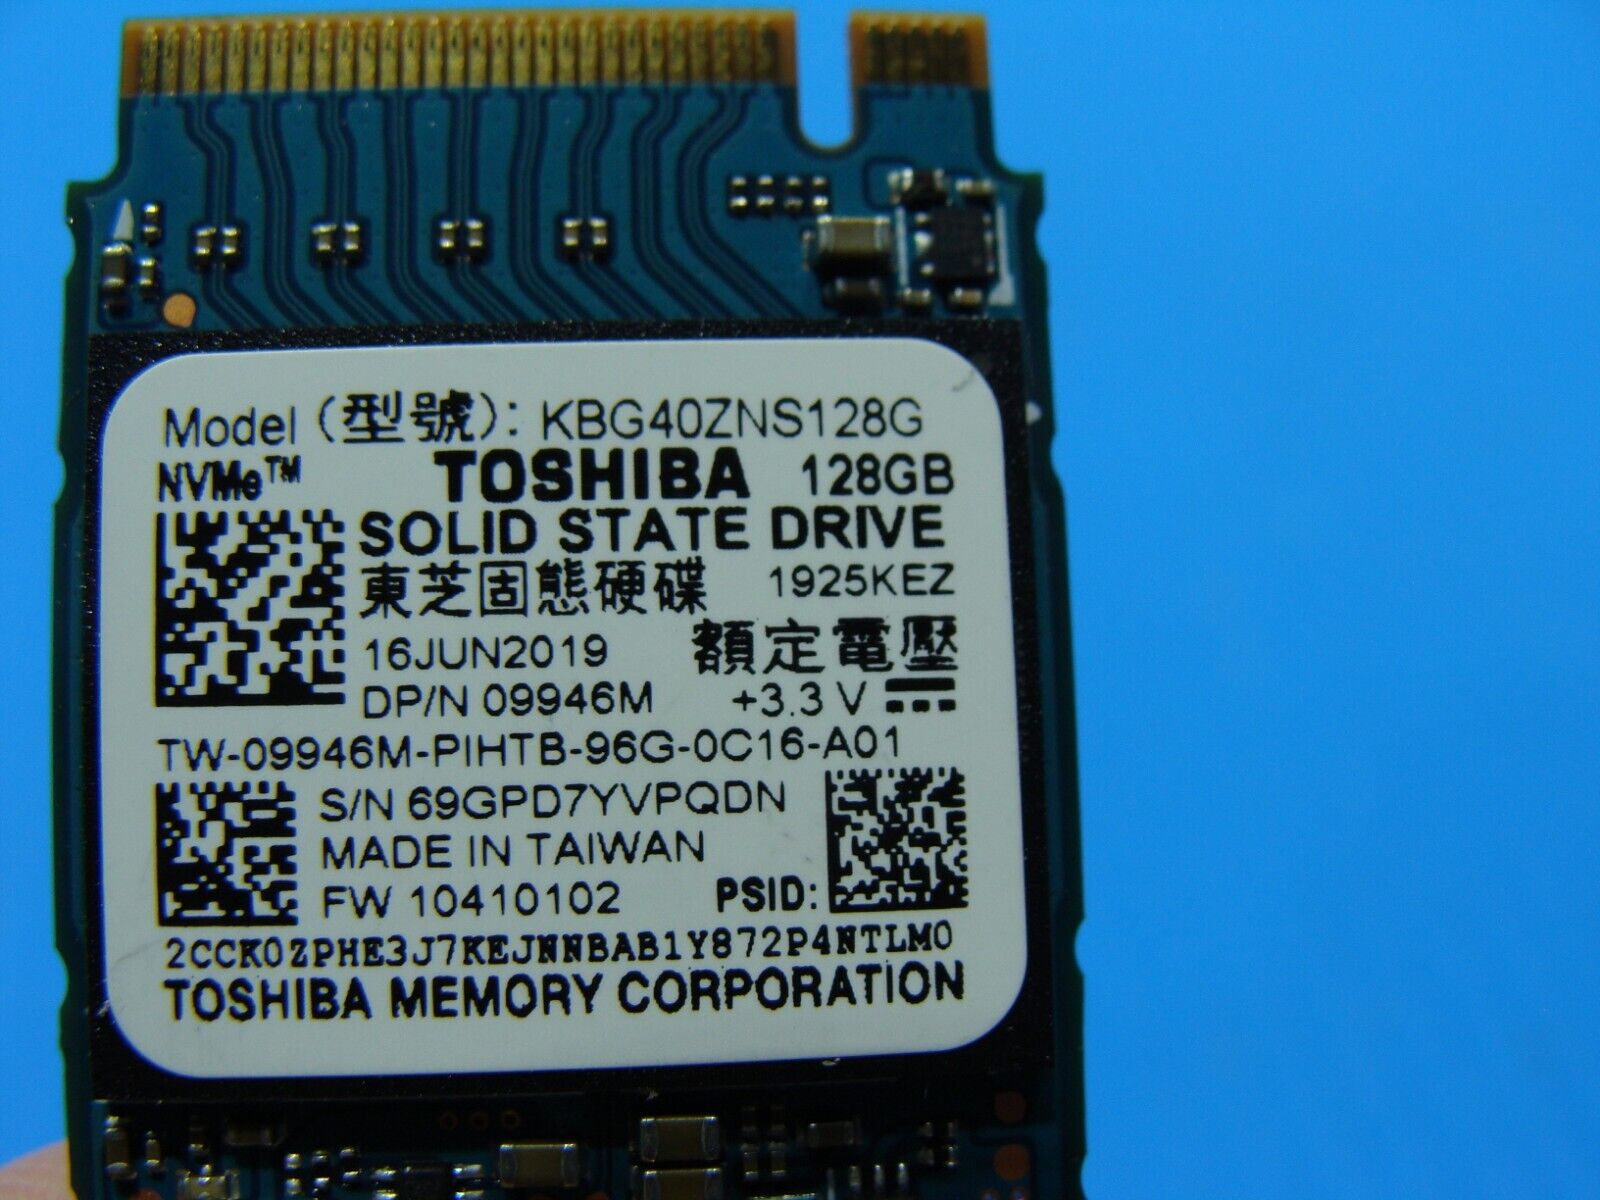 Dell 3583 Toshiba 128GB M.2 NVMe SSD Solid State Drive 9946M KBG40ZNS128G